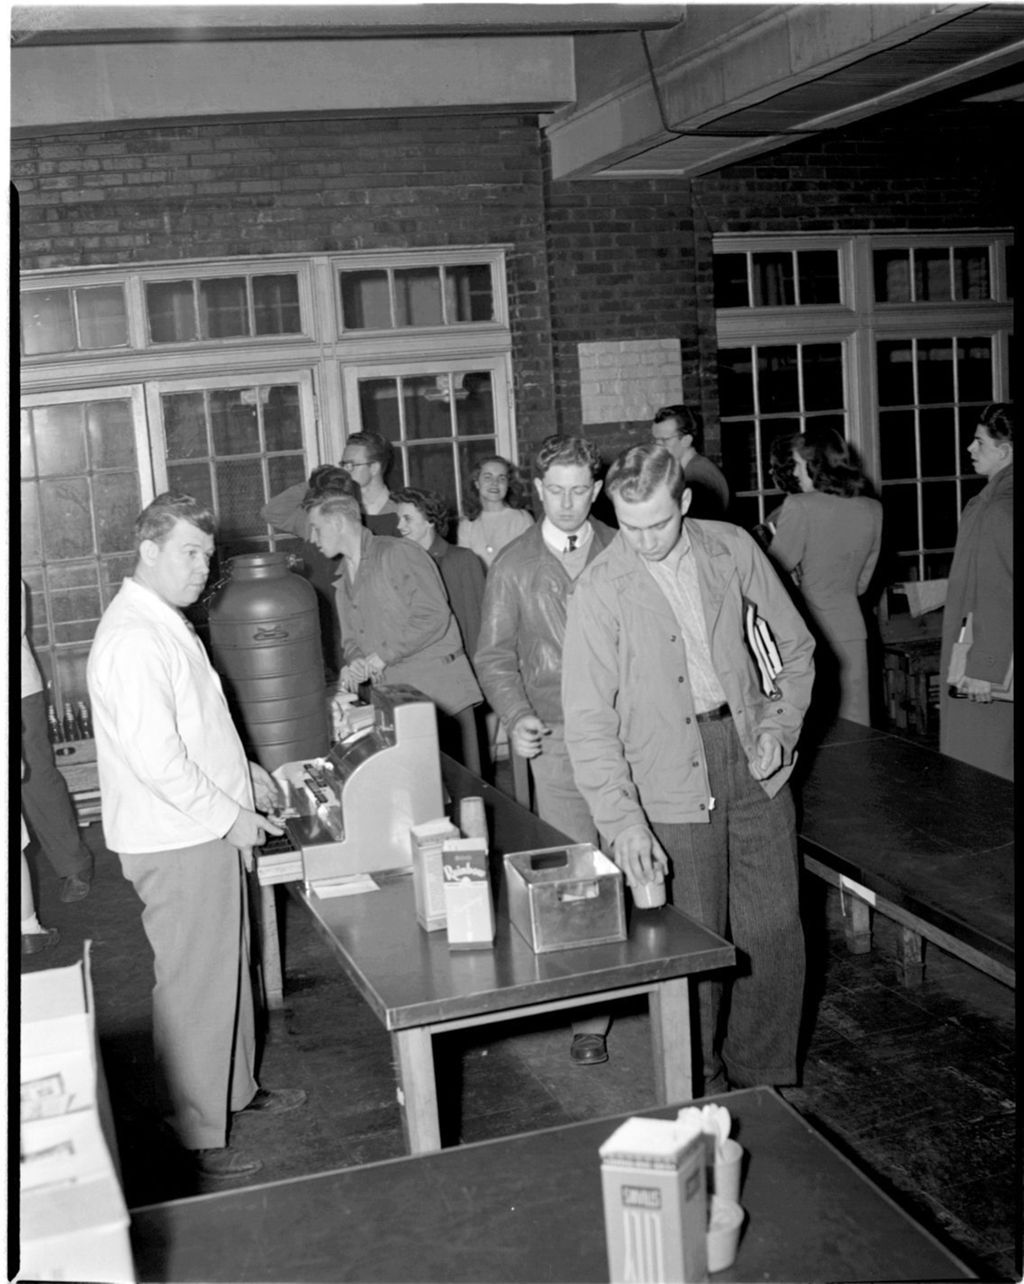 Students at the Cashier in the Cafeteria, University of Illinois Chicago Undergraduate Division